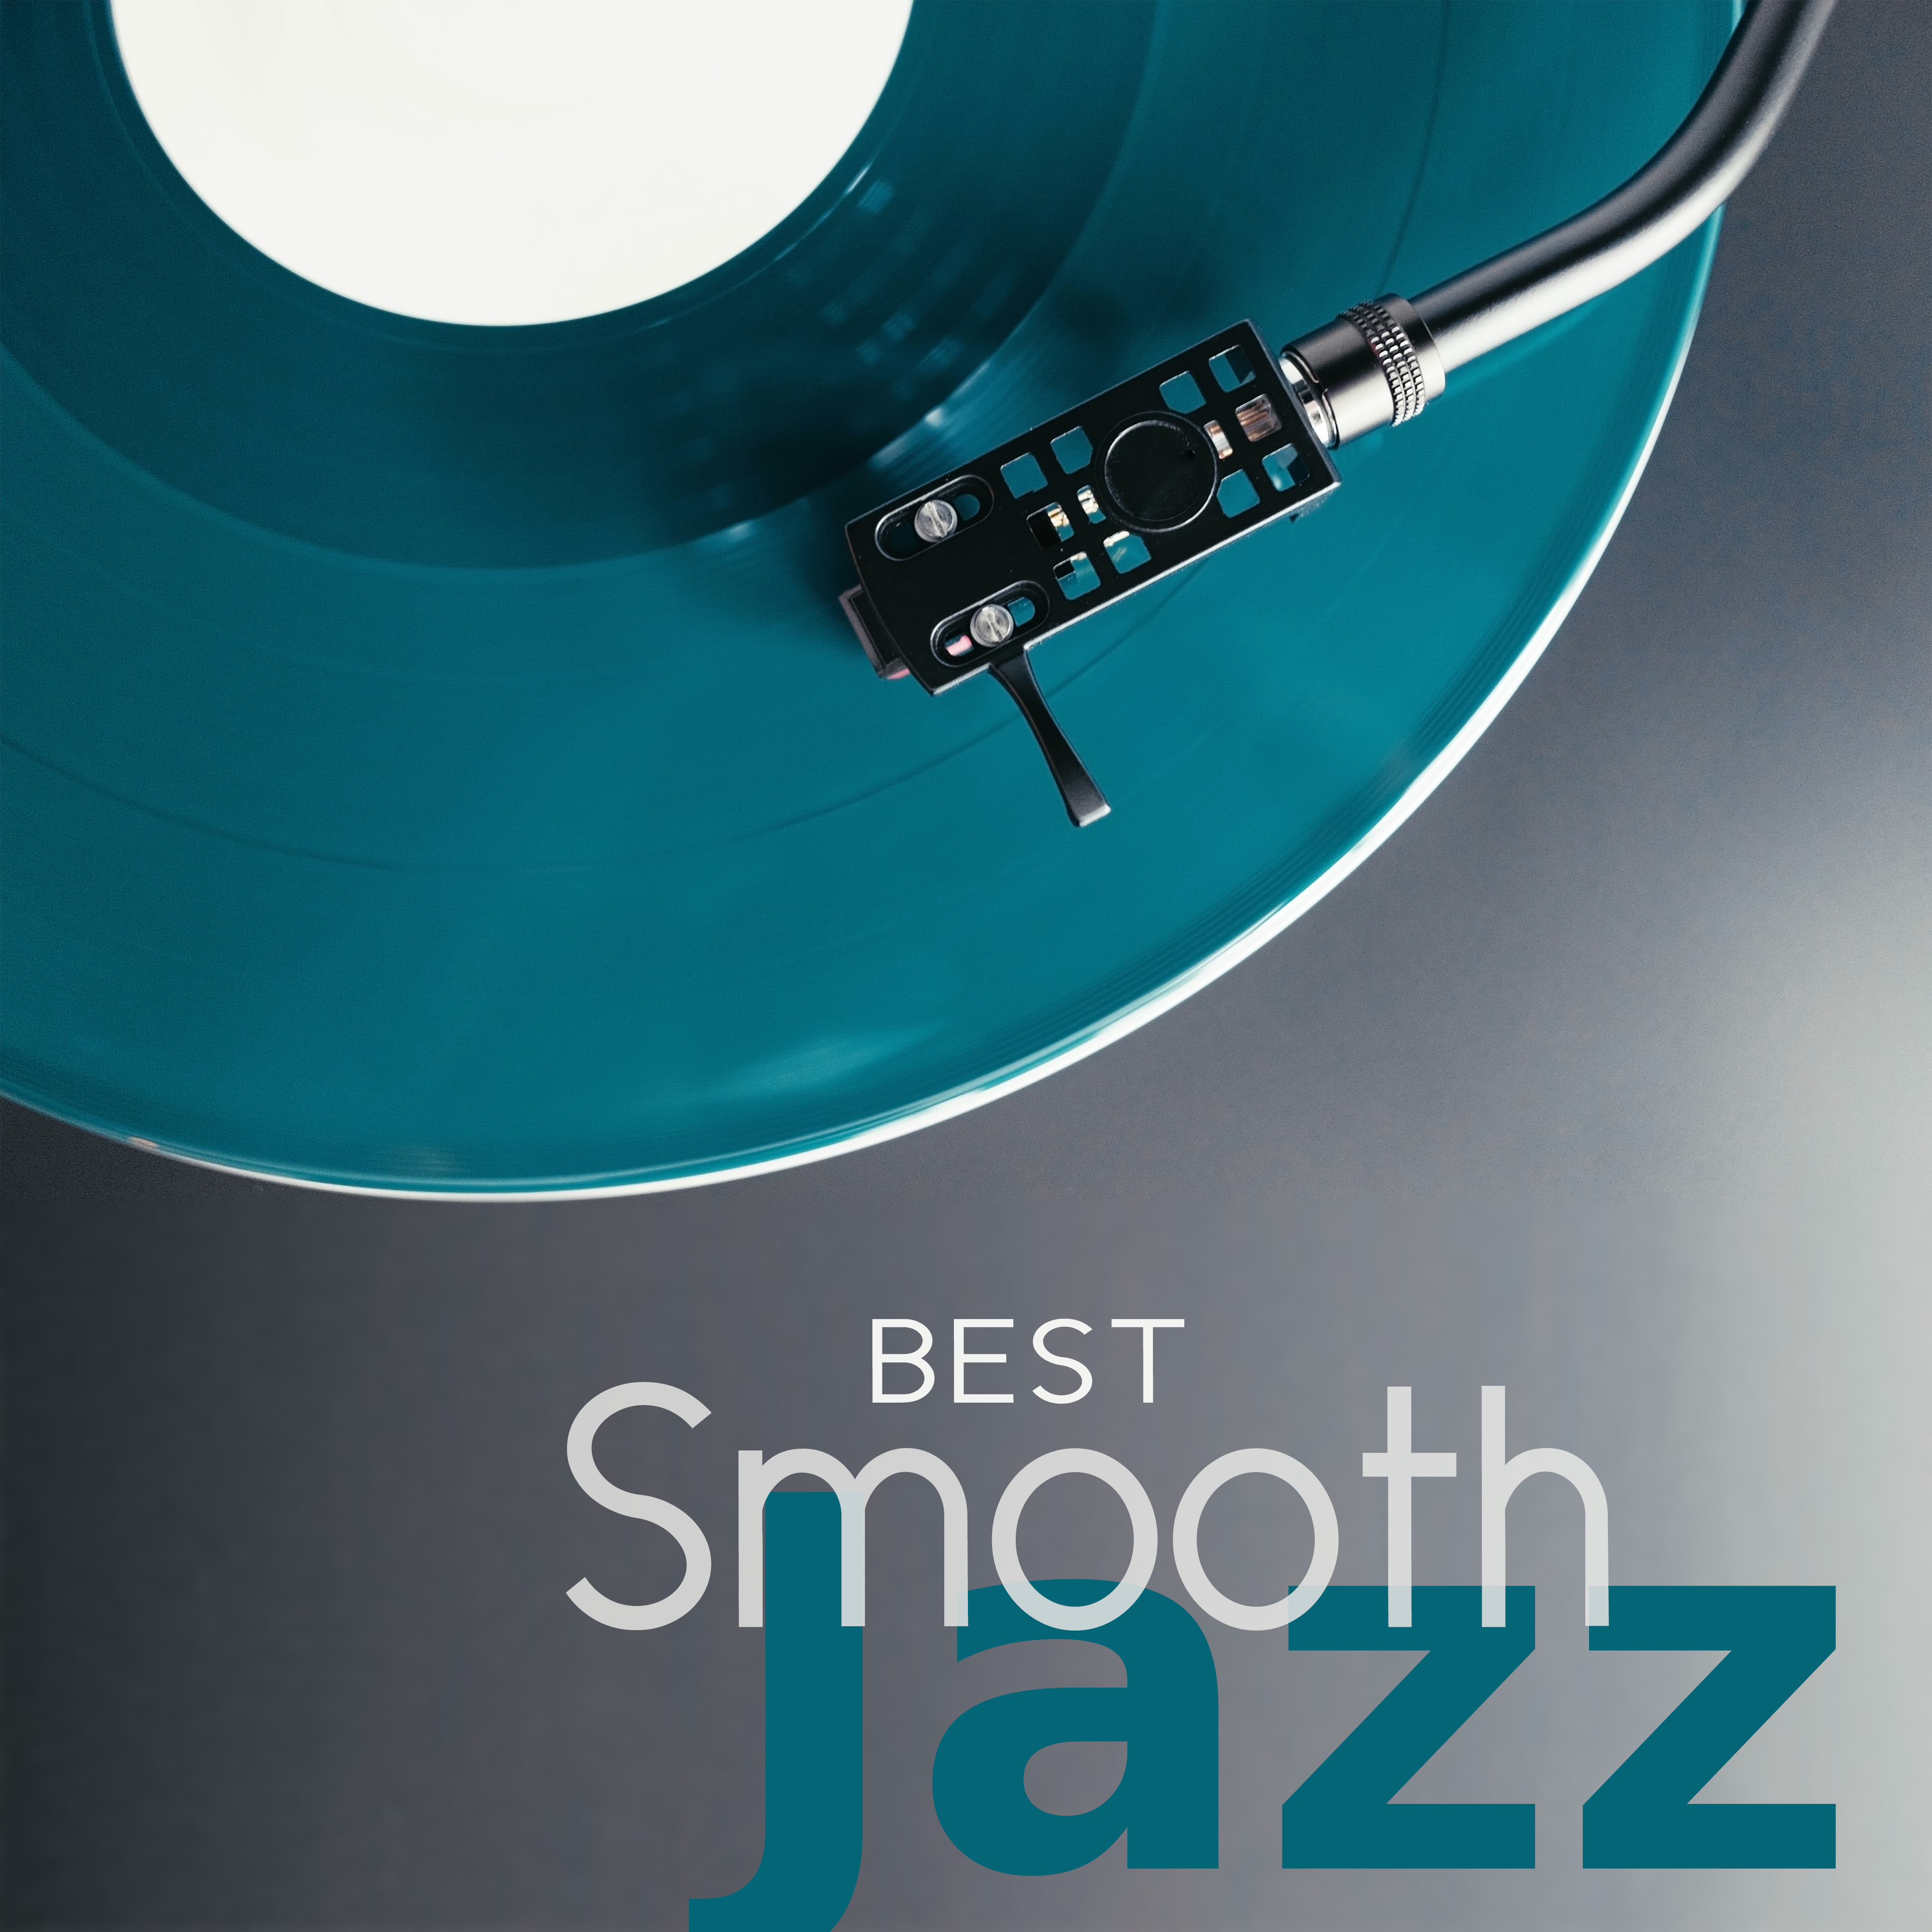 Best Smooth Jazz – Instrumental Music for Relaxation, Piano Bar Sounds, Mellow Jazz Cafe, Peaceful Piano, Deep Relax